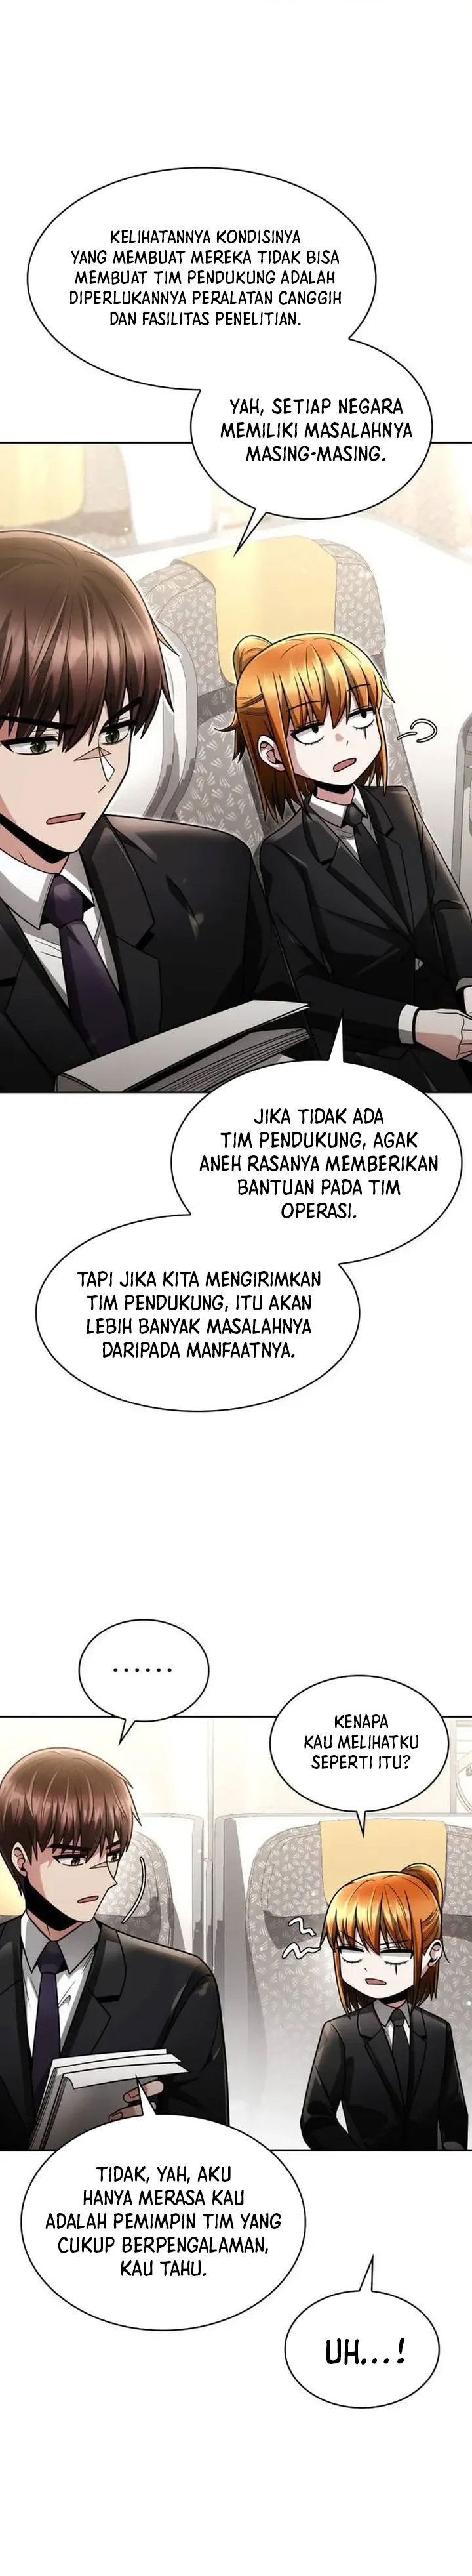 Dilarang COPAS - situs resmi www.mangacanblog.com - Komik clever cleaning life of the returned genius hunter 058 - chapter 58 59 Indonesia clever cleaning life of the returned genius hunter 058 - chapter 58 Terbaru 4|Baca Manga Komik Indonesia|Mangacan